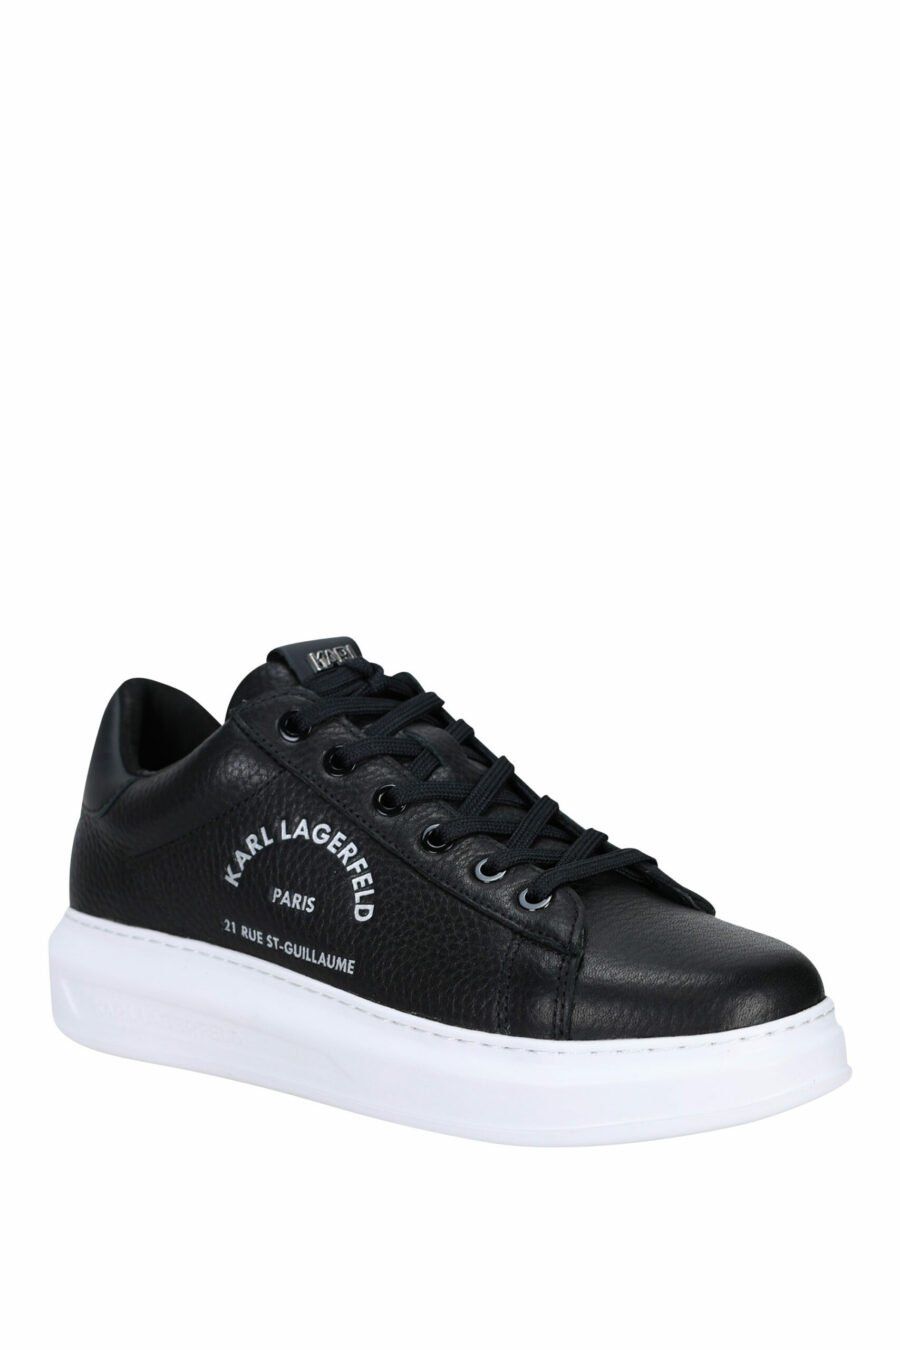 Black "kapri mens" textured trainers with white "rue st guillaume" logo - 5059529323782 1 scaled